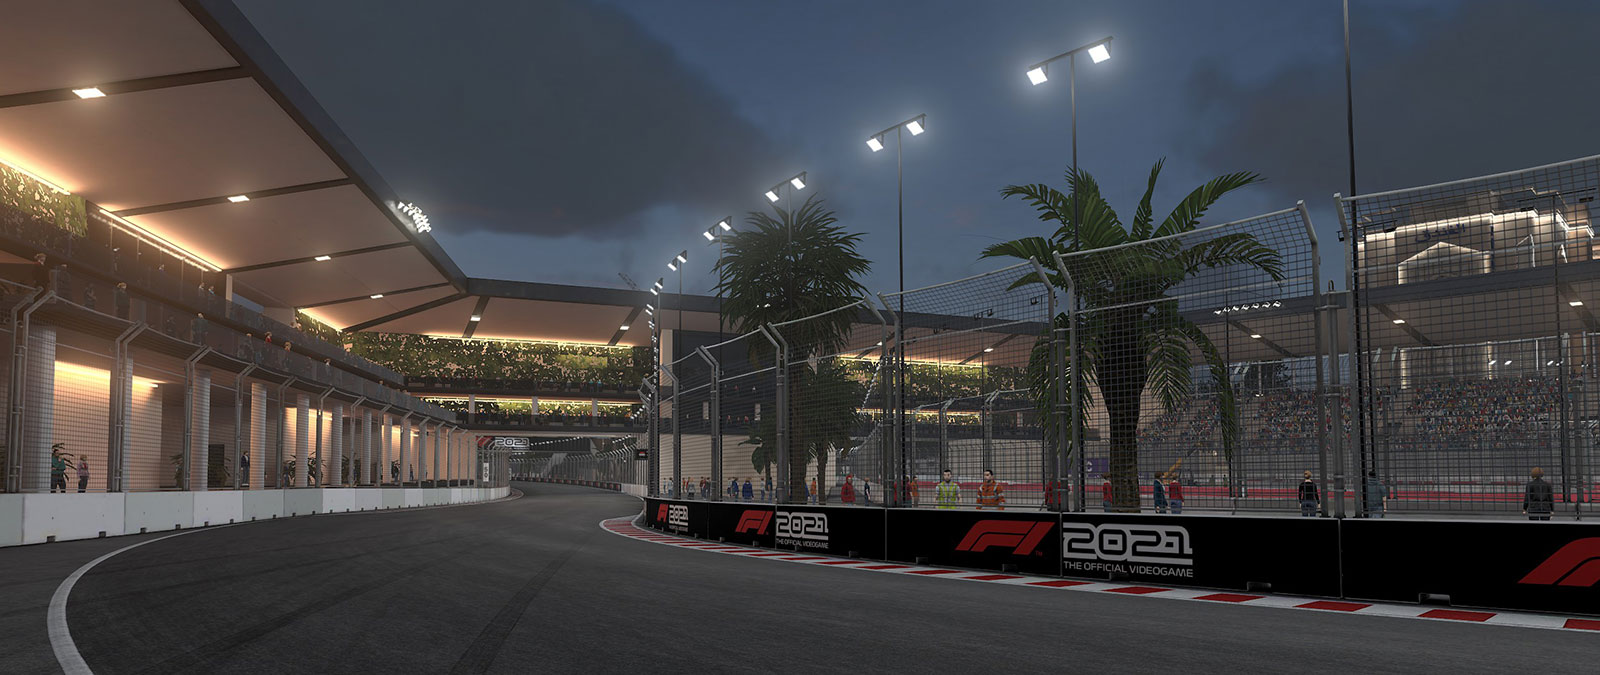 Just after sundown an F1 track is lit by street lights as fans watch from the stands.